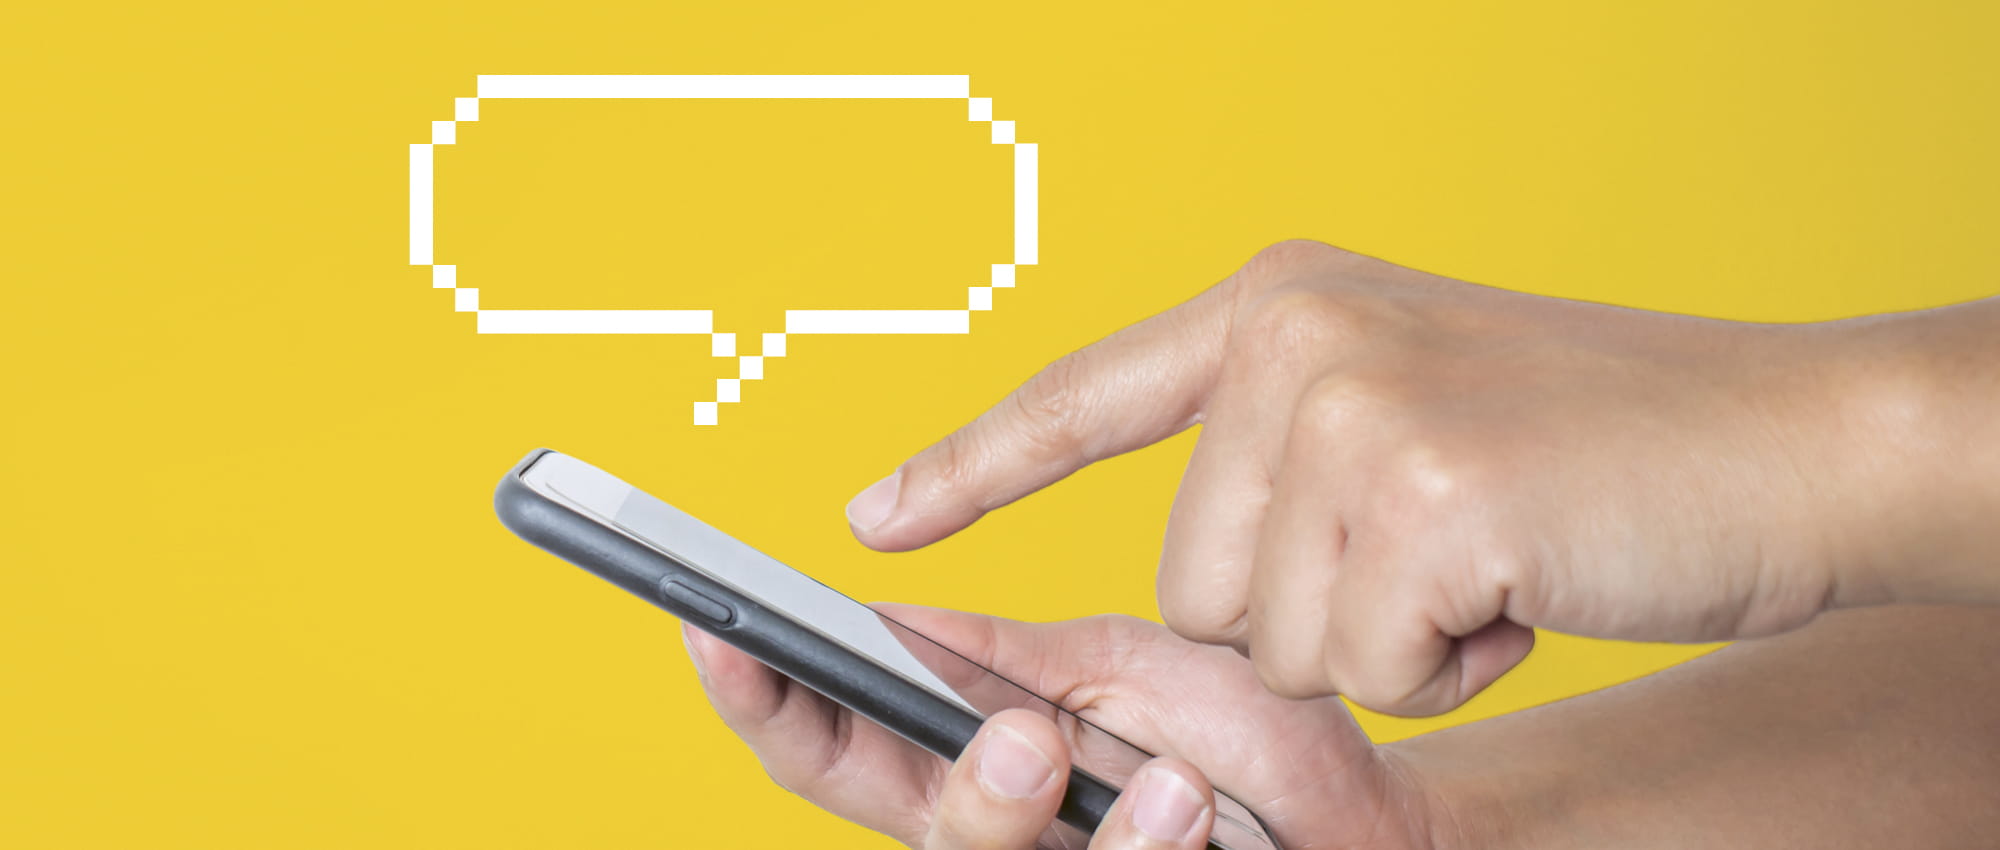 A hand is touching a phone. In the yellow background pops up a speech bubble. Copyright: iStock/Phira Phonruewiangphing